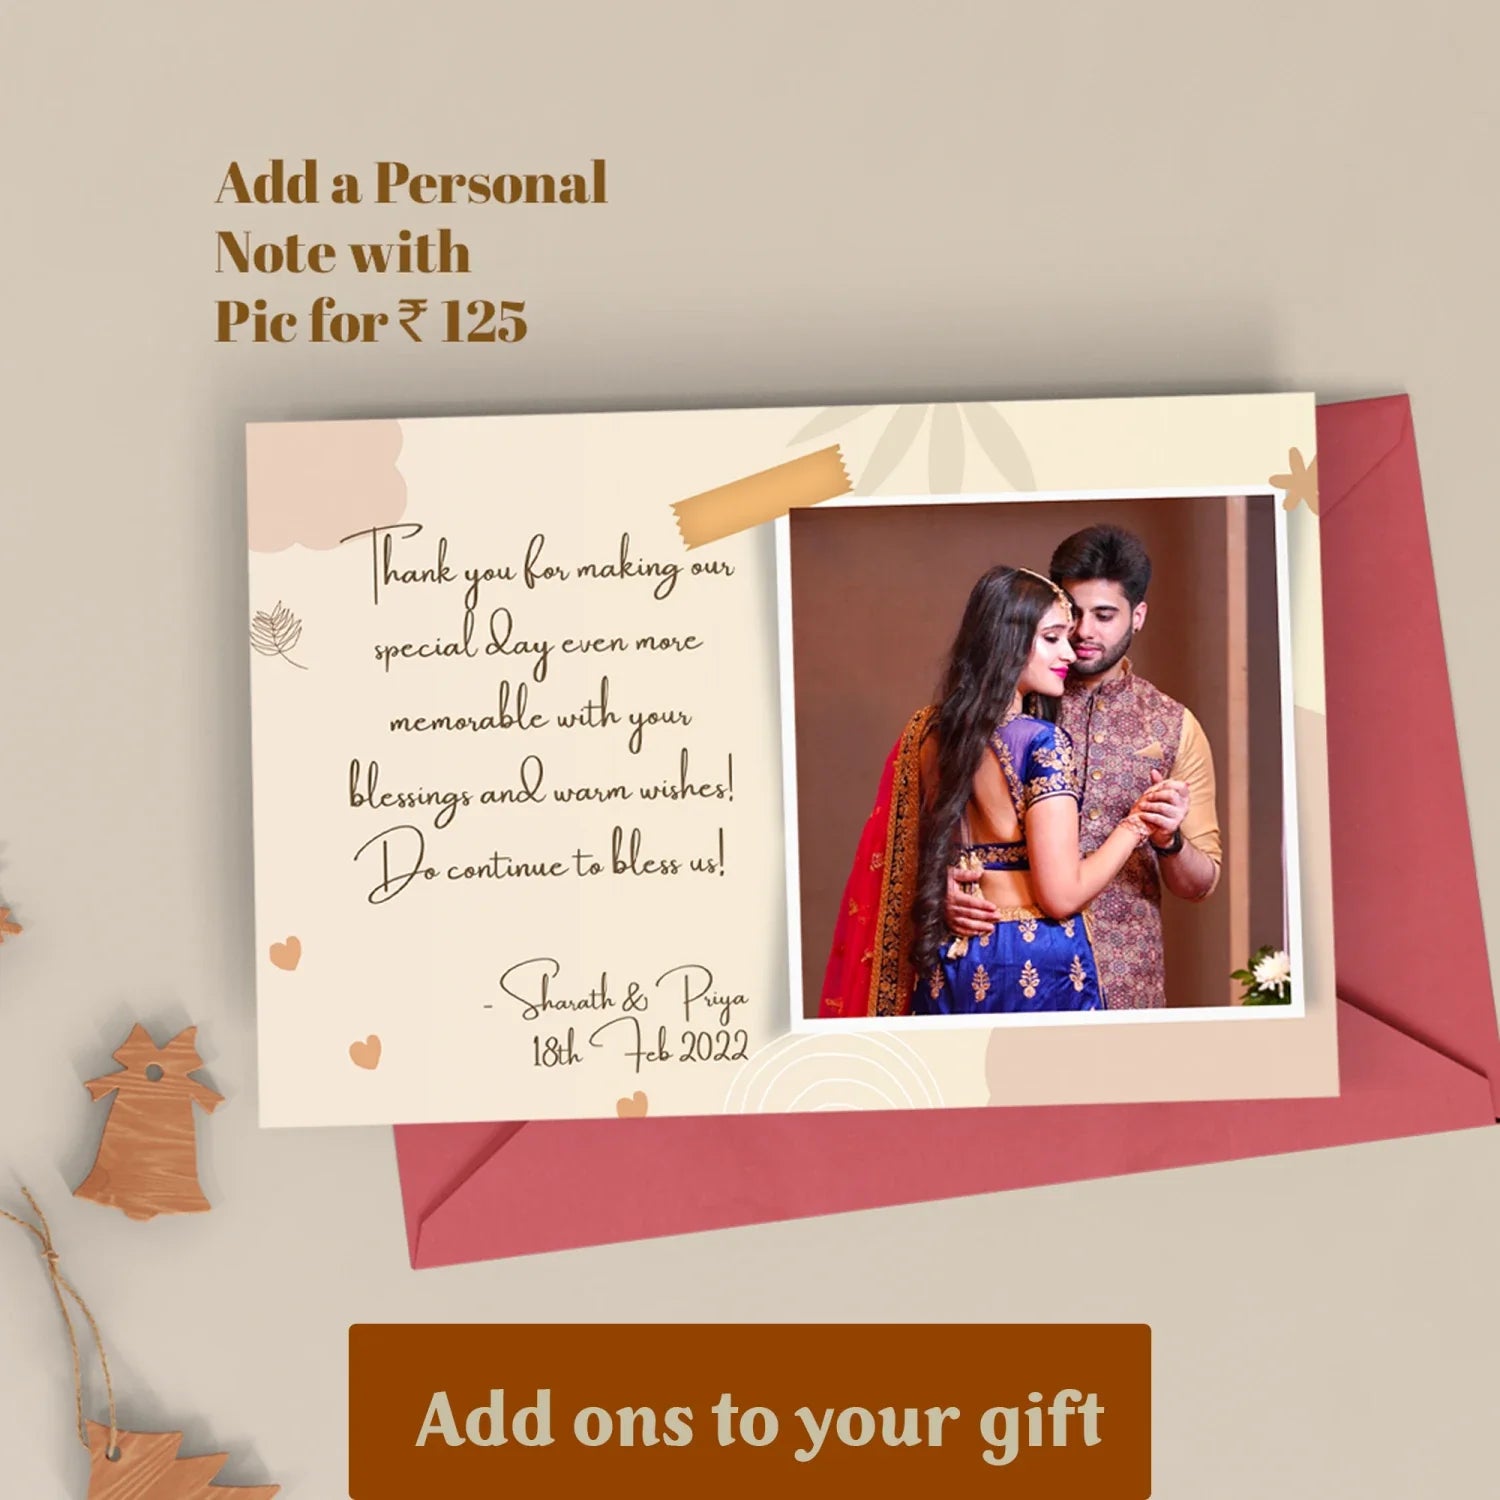 "Surprise your partner with this hand-made special note and walk down the memory lane with these nostalgic picture.  "